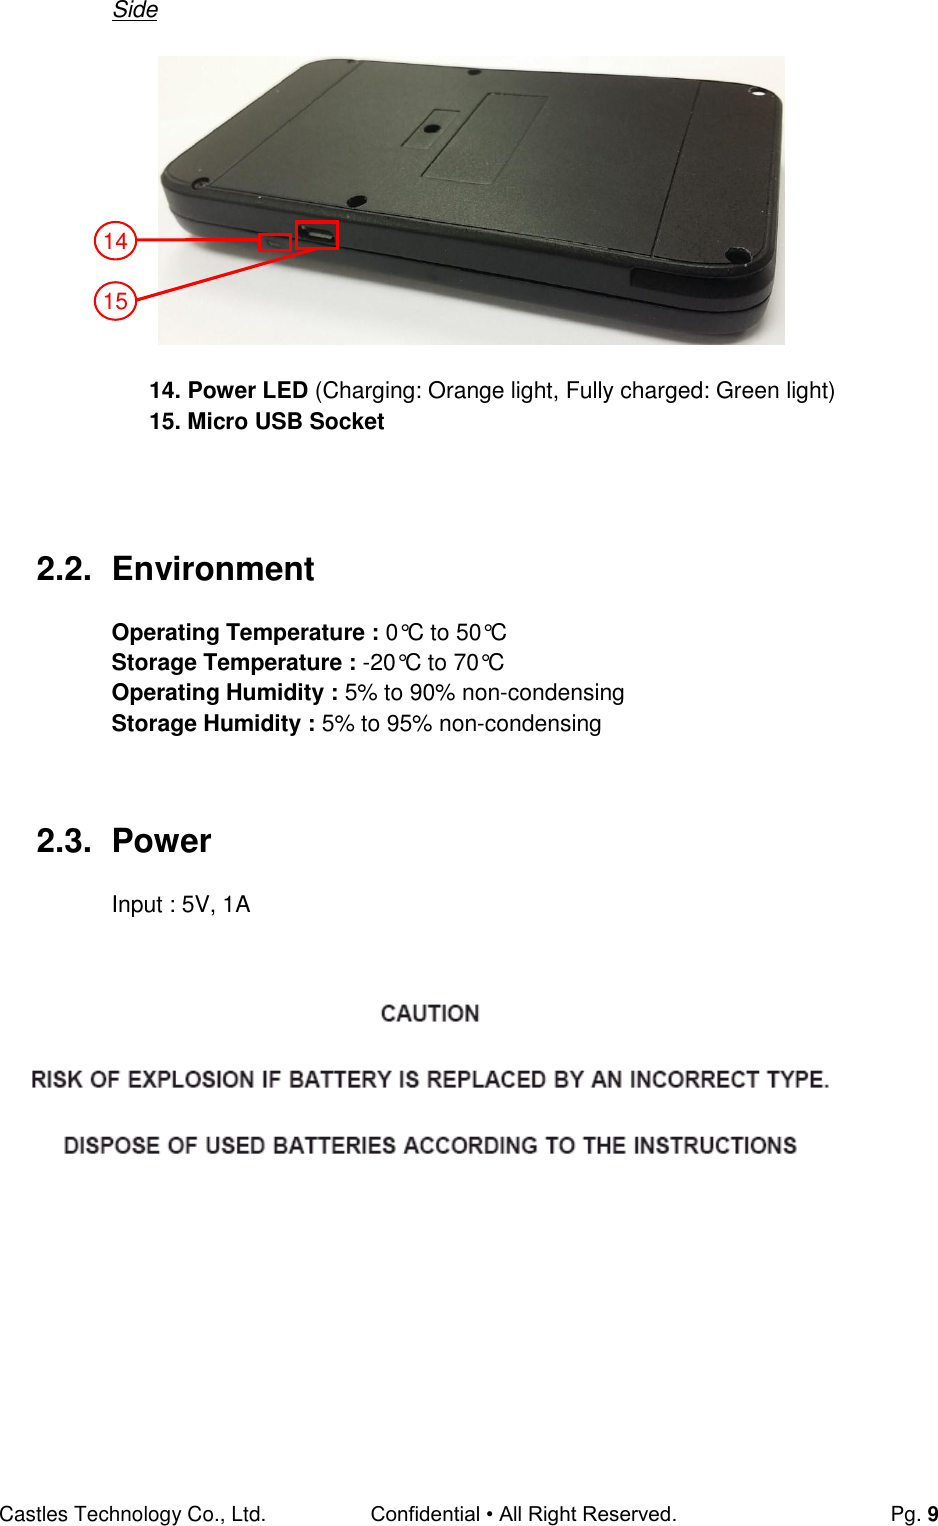 Castles Technology Co., Ltd. Confidential • All Right Reserved.  Pg. 9 Side        14. Power LED (Charging: Orange light, Fully charged: Green light)     15. Micro USB Socket    2.2.  Environment  Operating Temperature : 0°C to 50°C Storage Temperature : -20°C to 70°C Operating Humidity : 5% to 90% non-condensing Storage Humidity : 5% to 95% non-condensing   2.3.  Power Input : 5V, 1A       14 15 